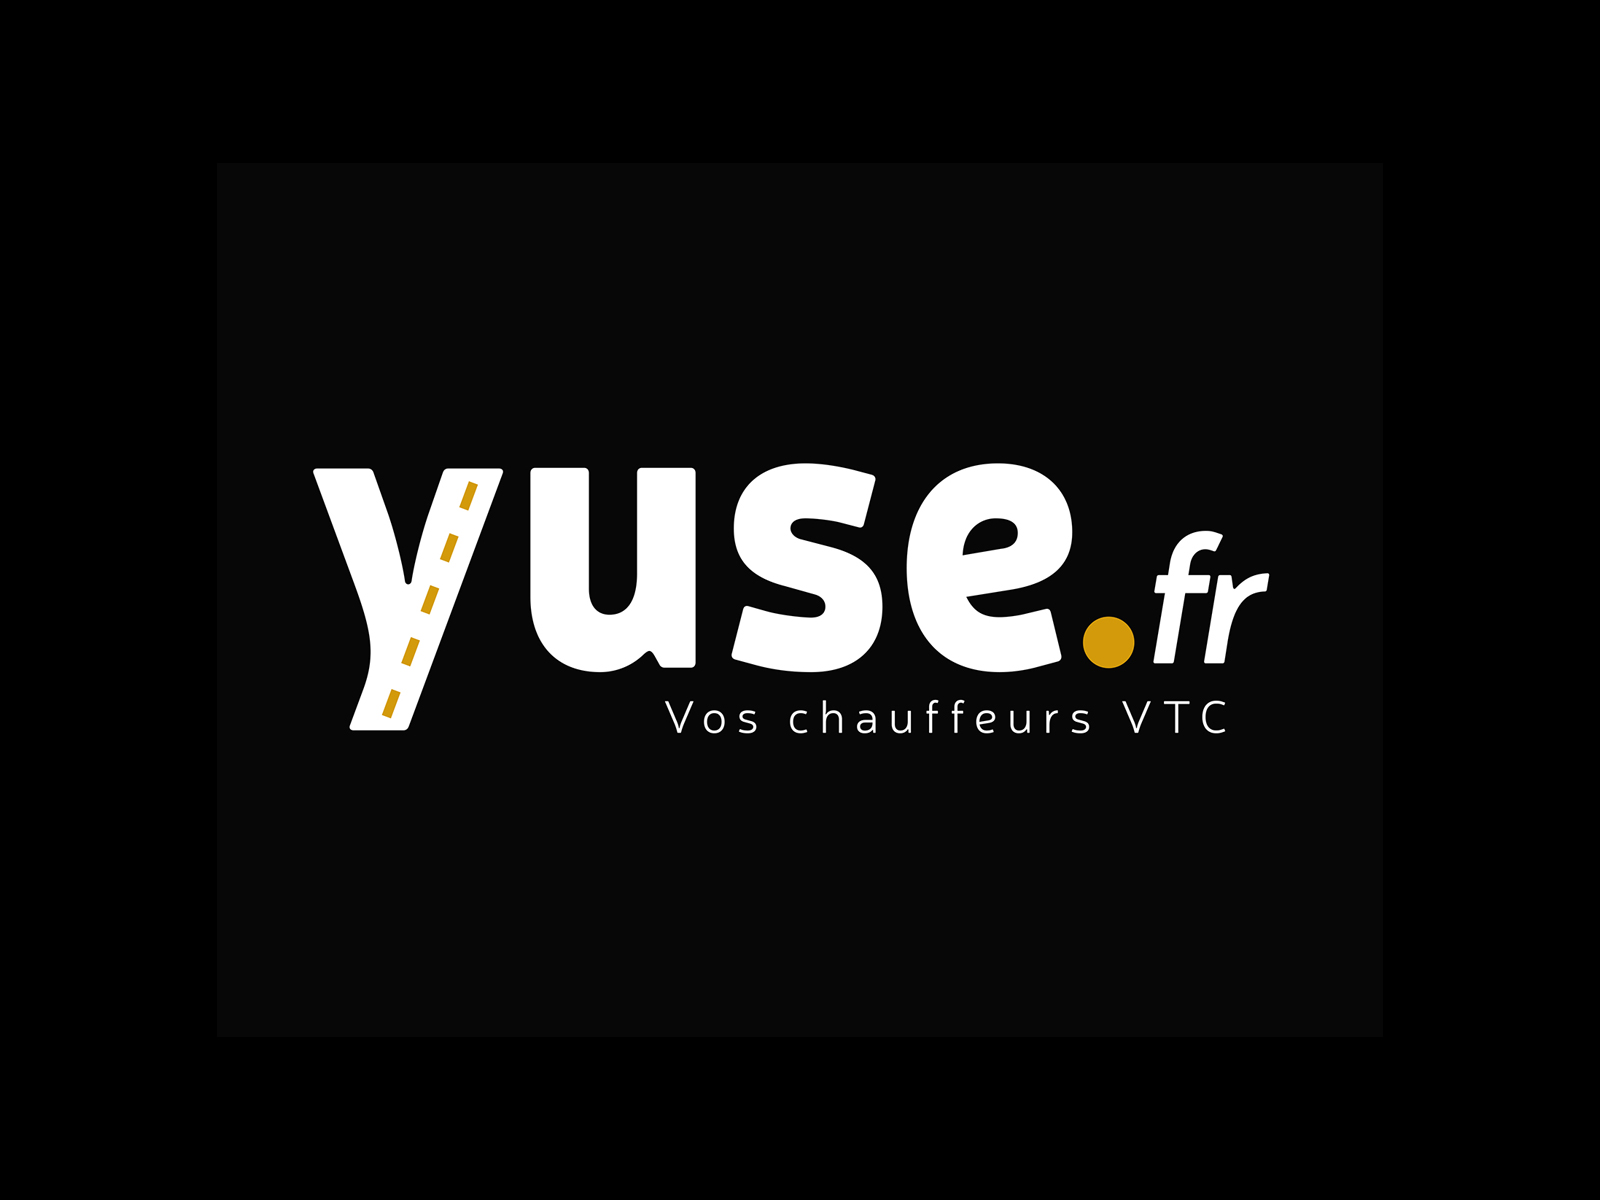 YUSE an alternative to Taxi in Biarritz